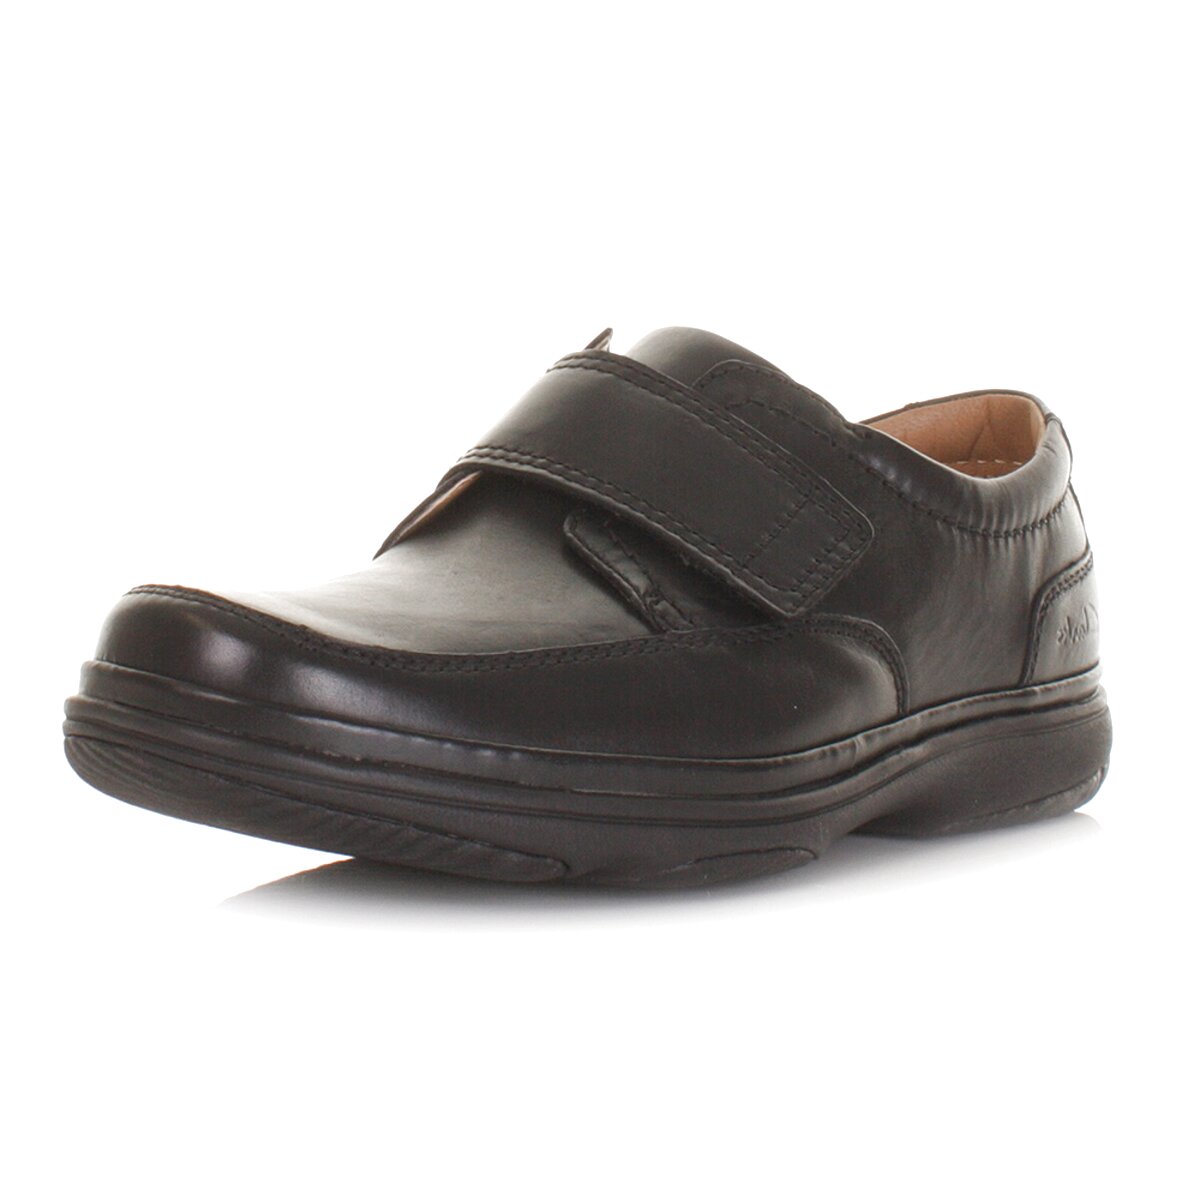 clarks shoes with velcro